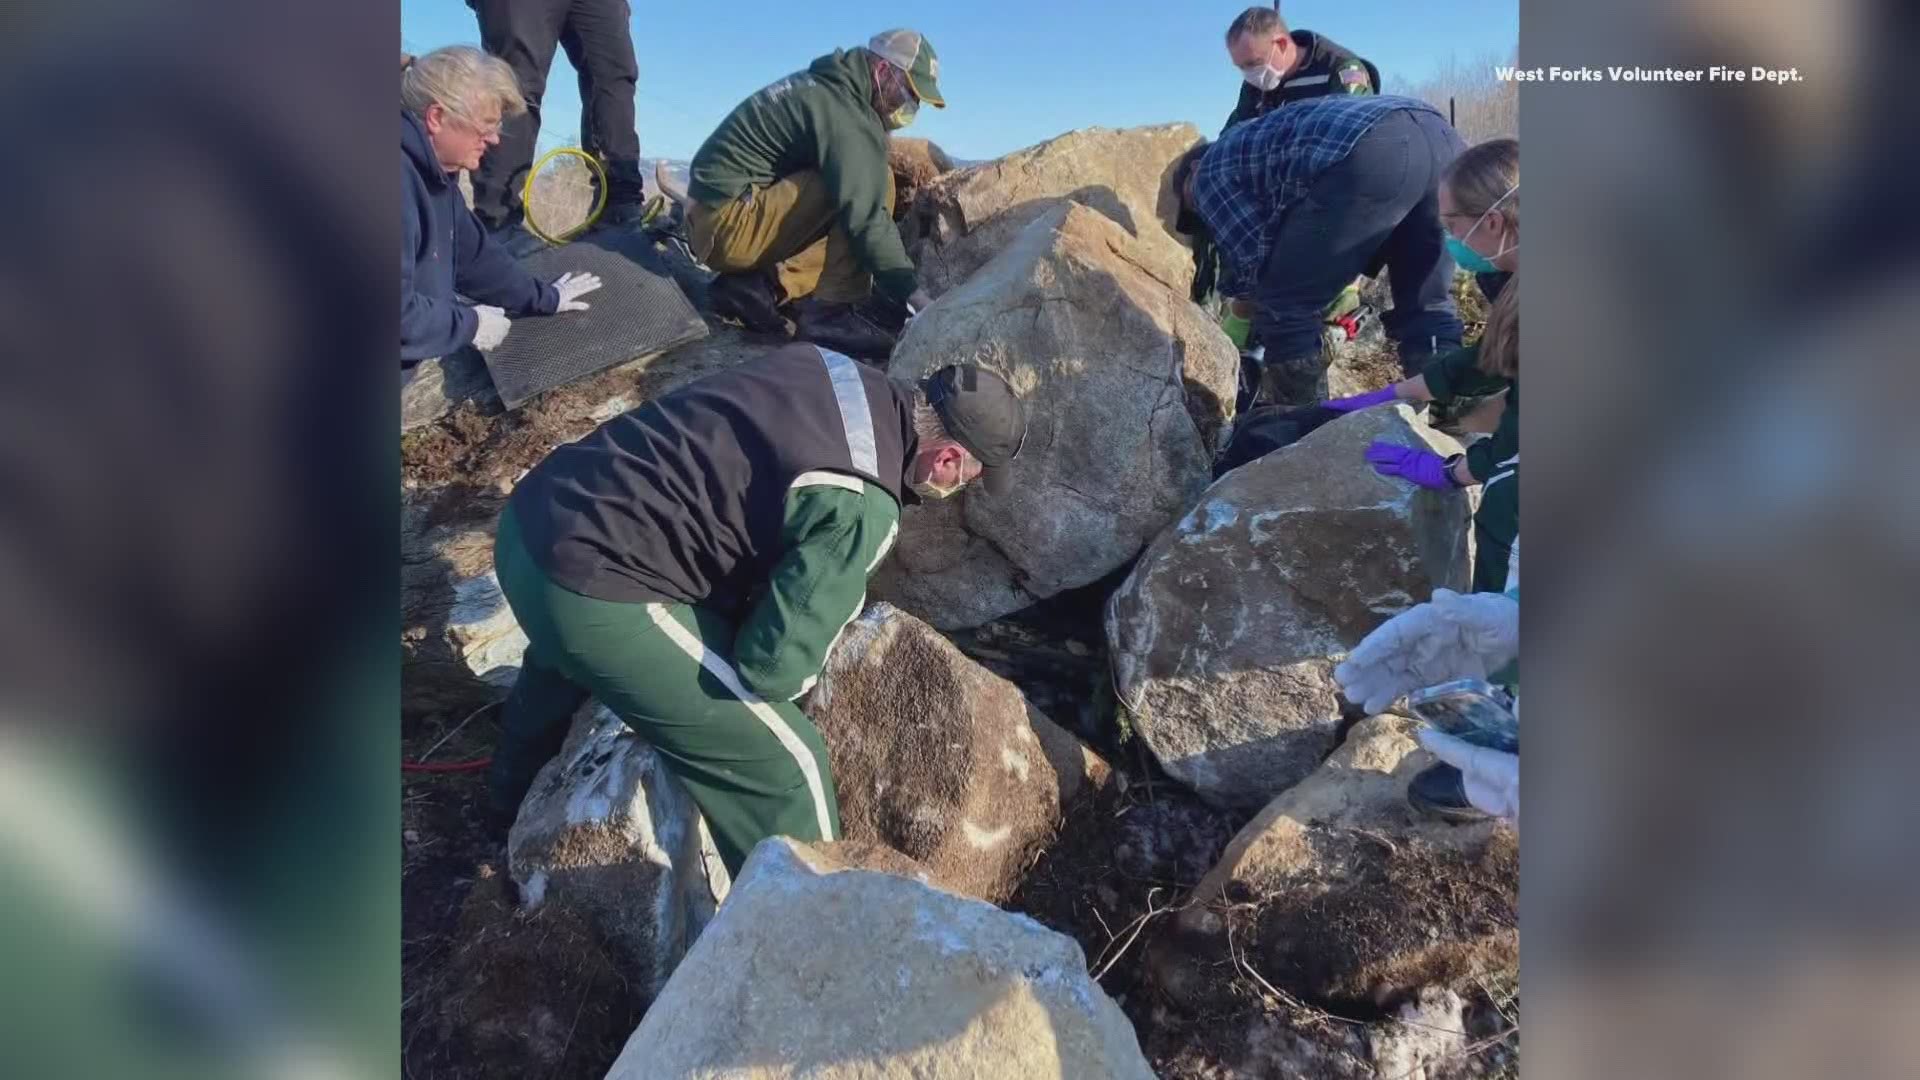 According to officials, the man climbed up on the rocks to take a picture before losing his balance and falling, causing the boulder to tumble down on top of him.